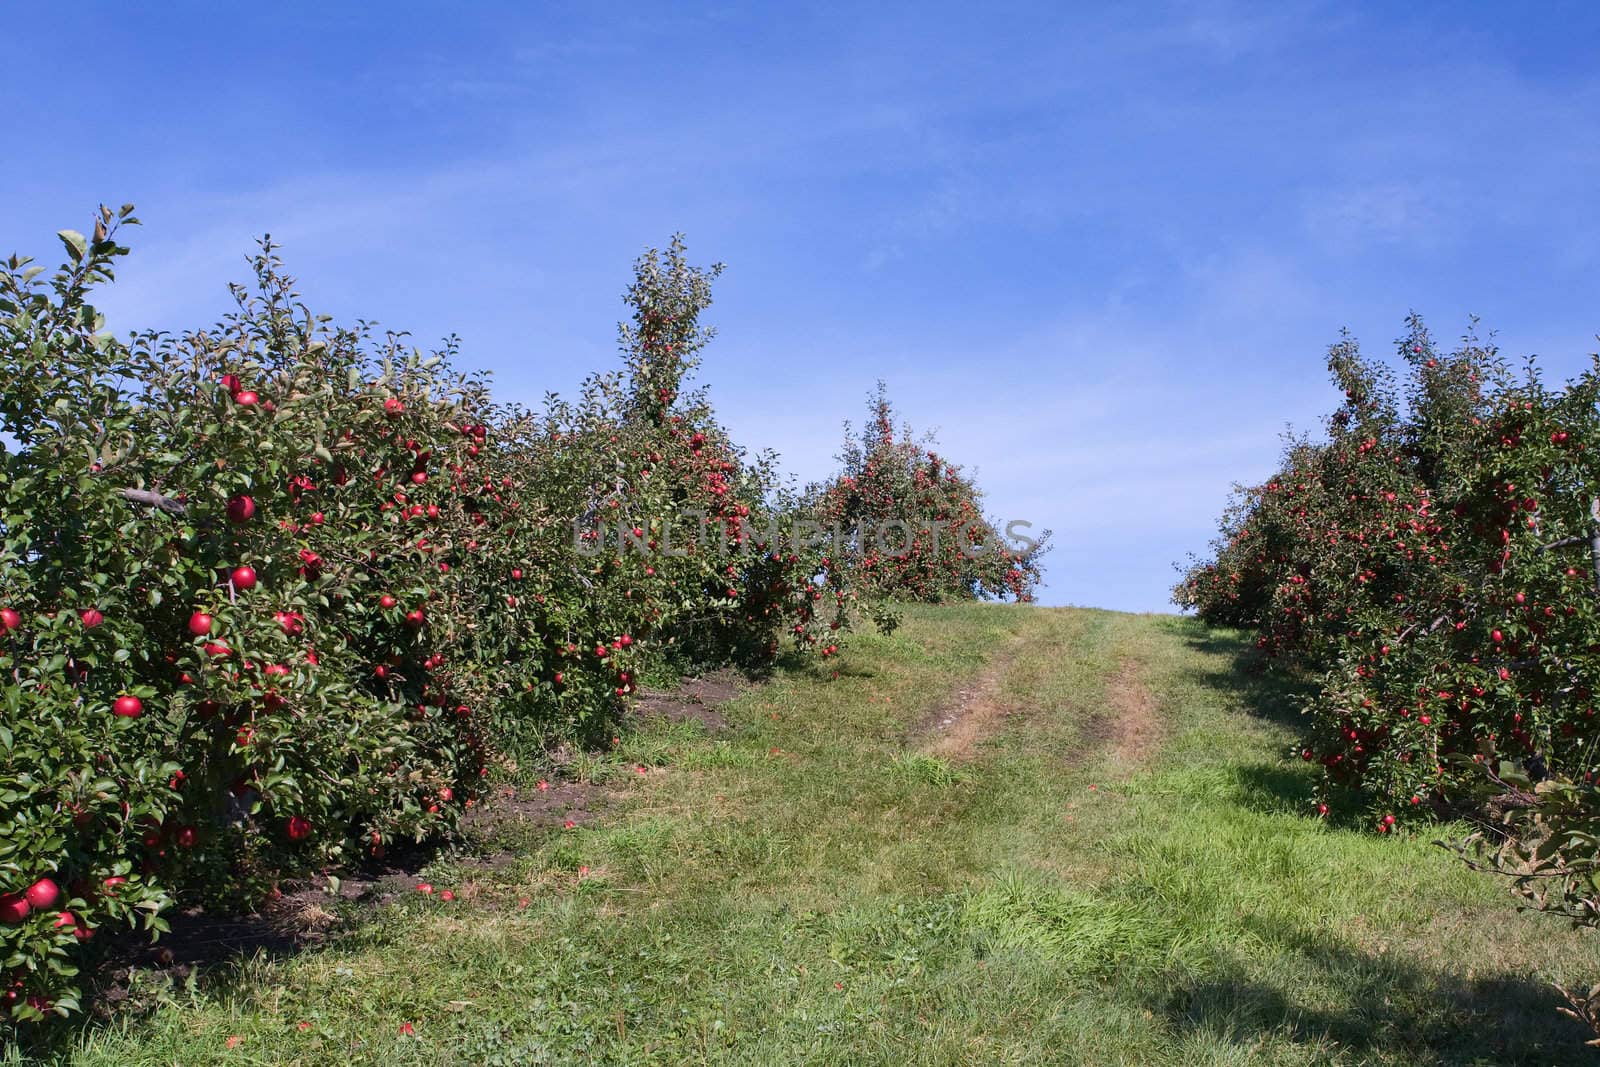 Apple Orchard trees full of rippend apples.